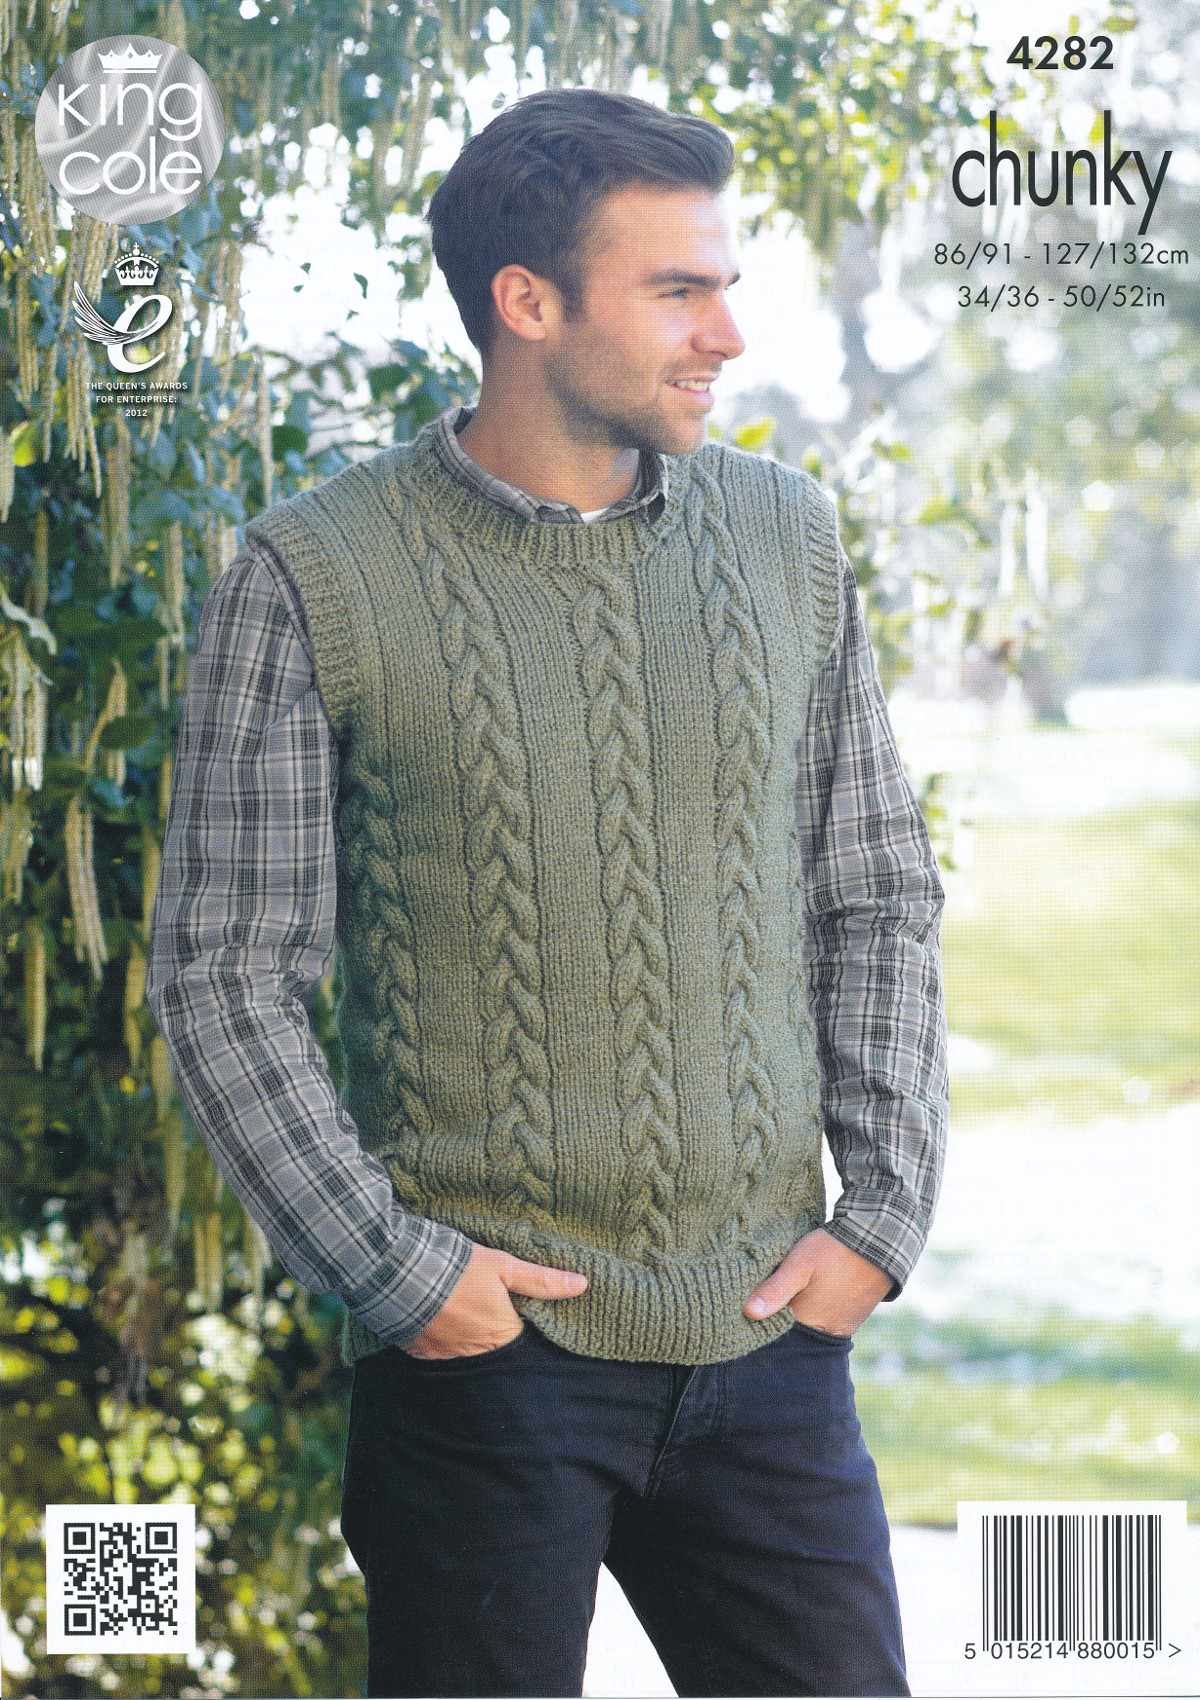 Knit Sweaters Patterns Details About Mens Chunky Knitting Pattern King Cole Cable Knit Sweater Jumper Pullover 4282